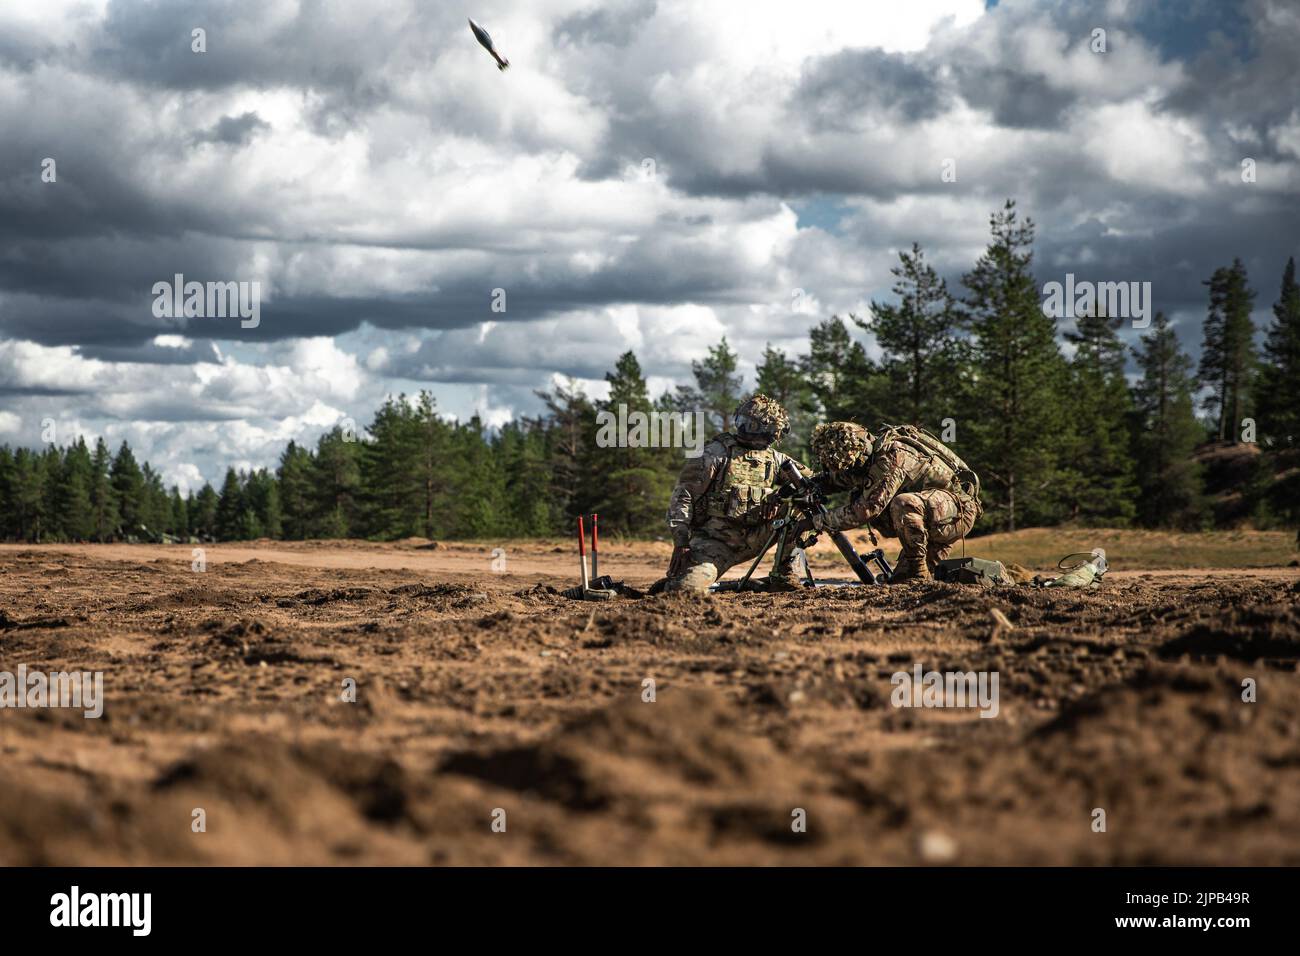 U.S. Soldiers assigned to Viper Company, 1st Battalion, 26th Infantry Regiment, 2nd Brigade Combat Team, 101st Airborne Division (Air Assault), fire their M224 60 mm mortar system as part of a fire mission in support of the company’s maneuver during a multinational live-fire exercise held at Rovaniemi Training Area, Finland, Aug. 11, 2022. The LFX was part of the Finnish Summer Exercise, where U.S. and Finnish troops had the opportunity to train together to amplify and strengthen the partnership and interoperability between the two nations. (U.S. Army National Guard photo by Sgt. Agustín Monta Stock Photo